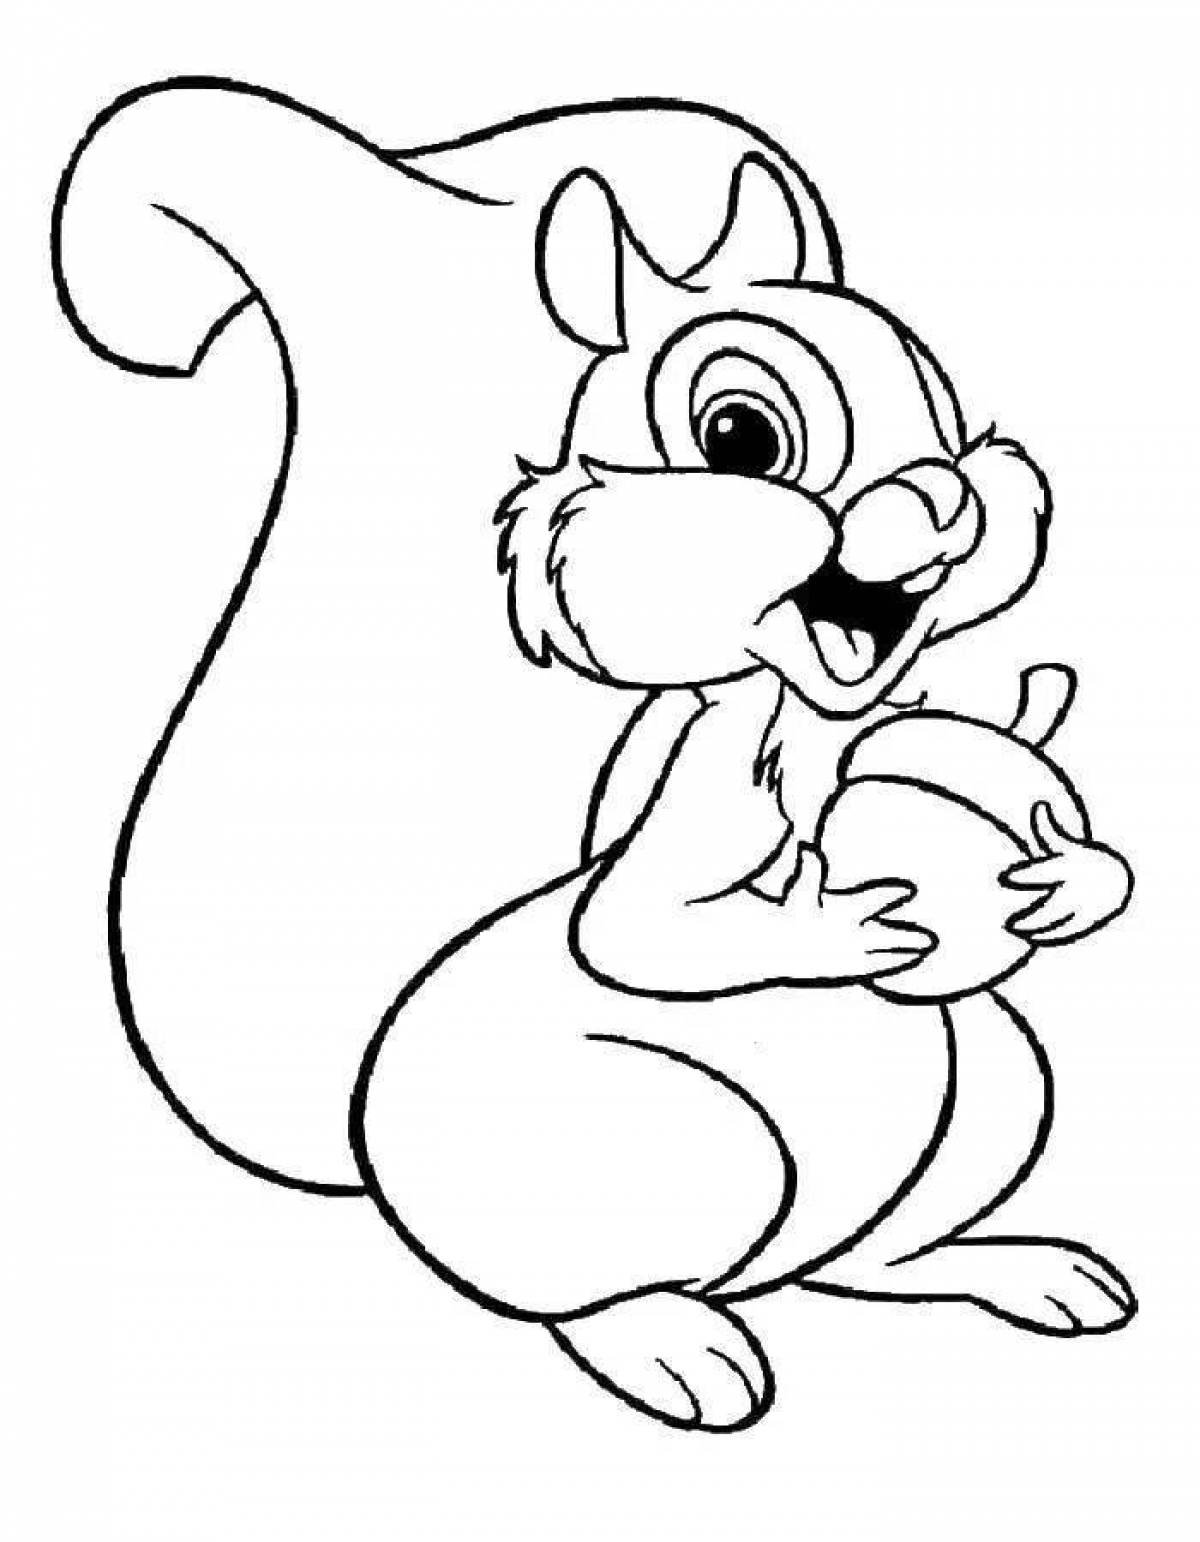 Squirrel humorous coloring book for children 3-4 years old